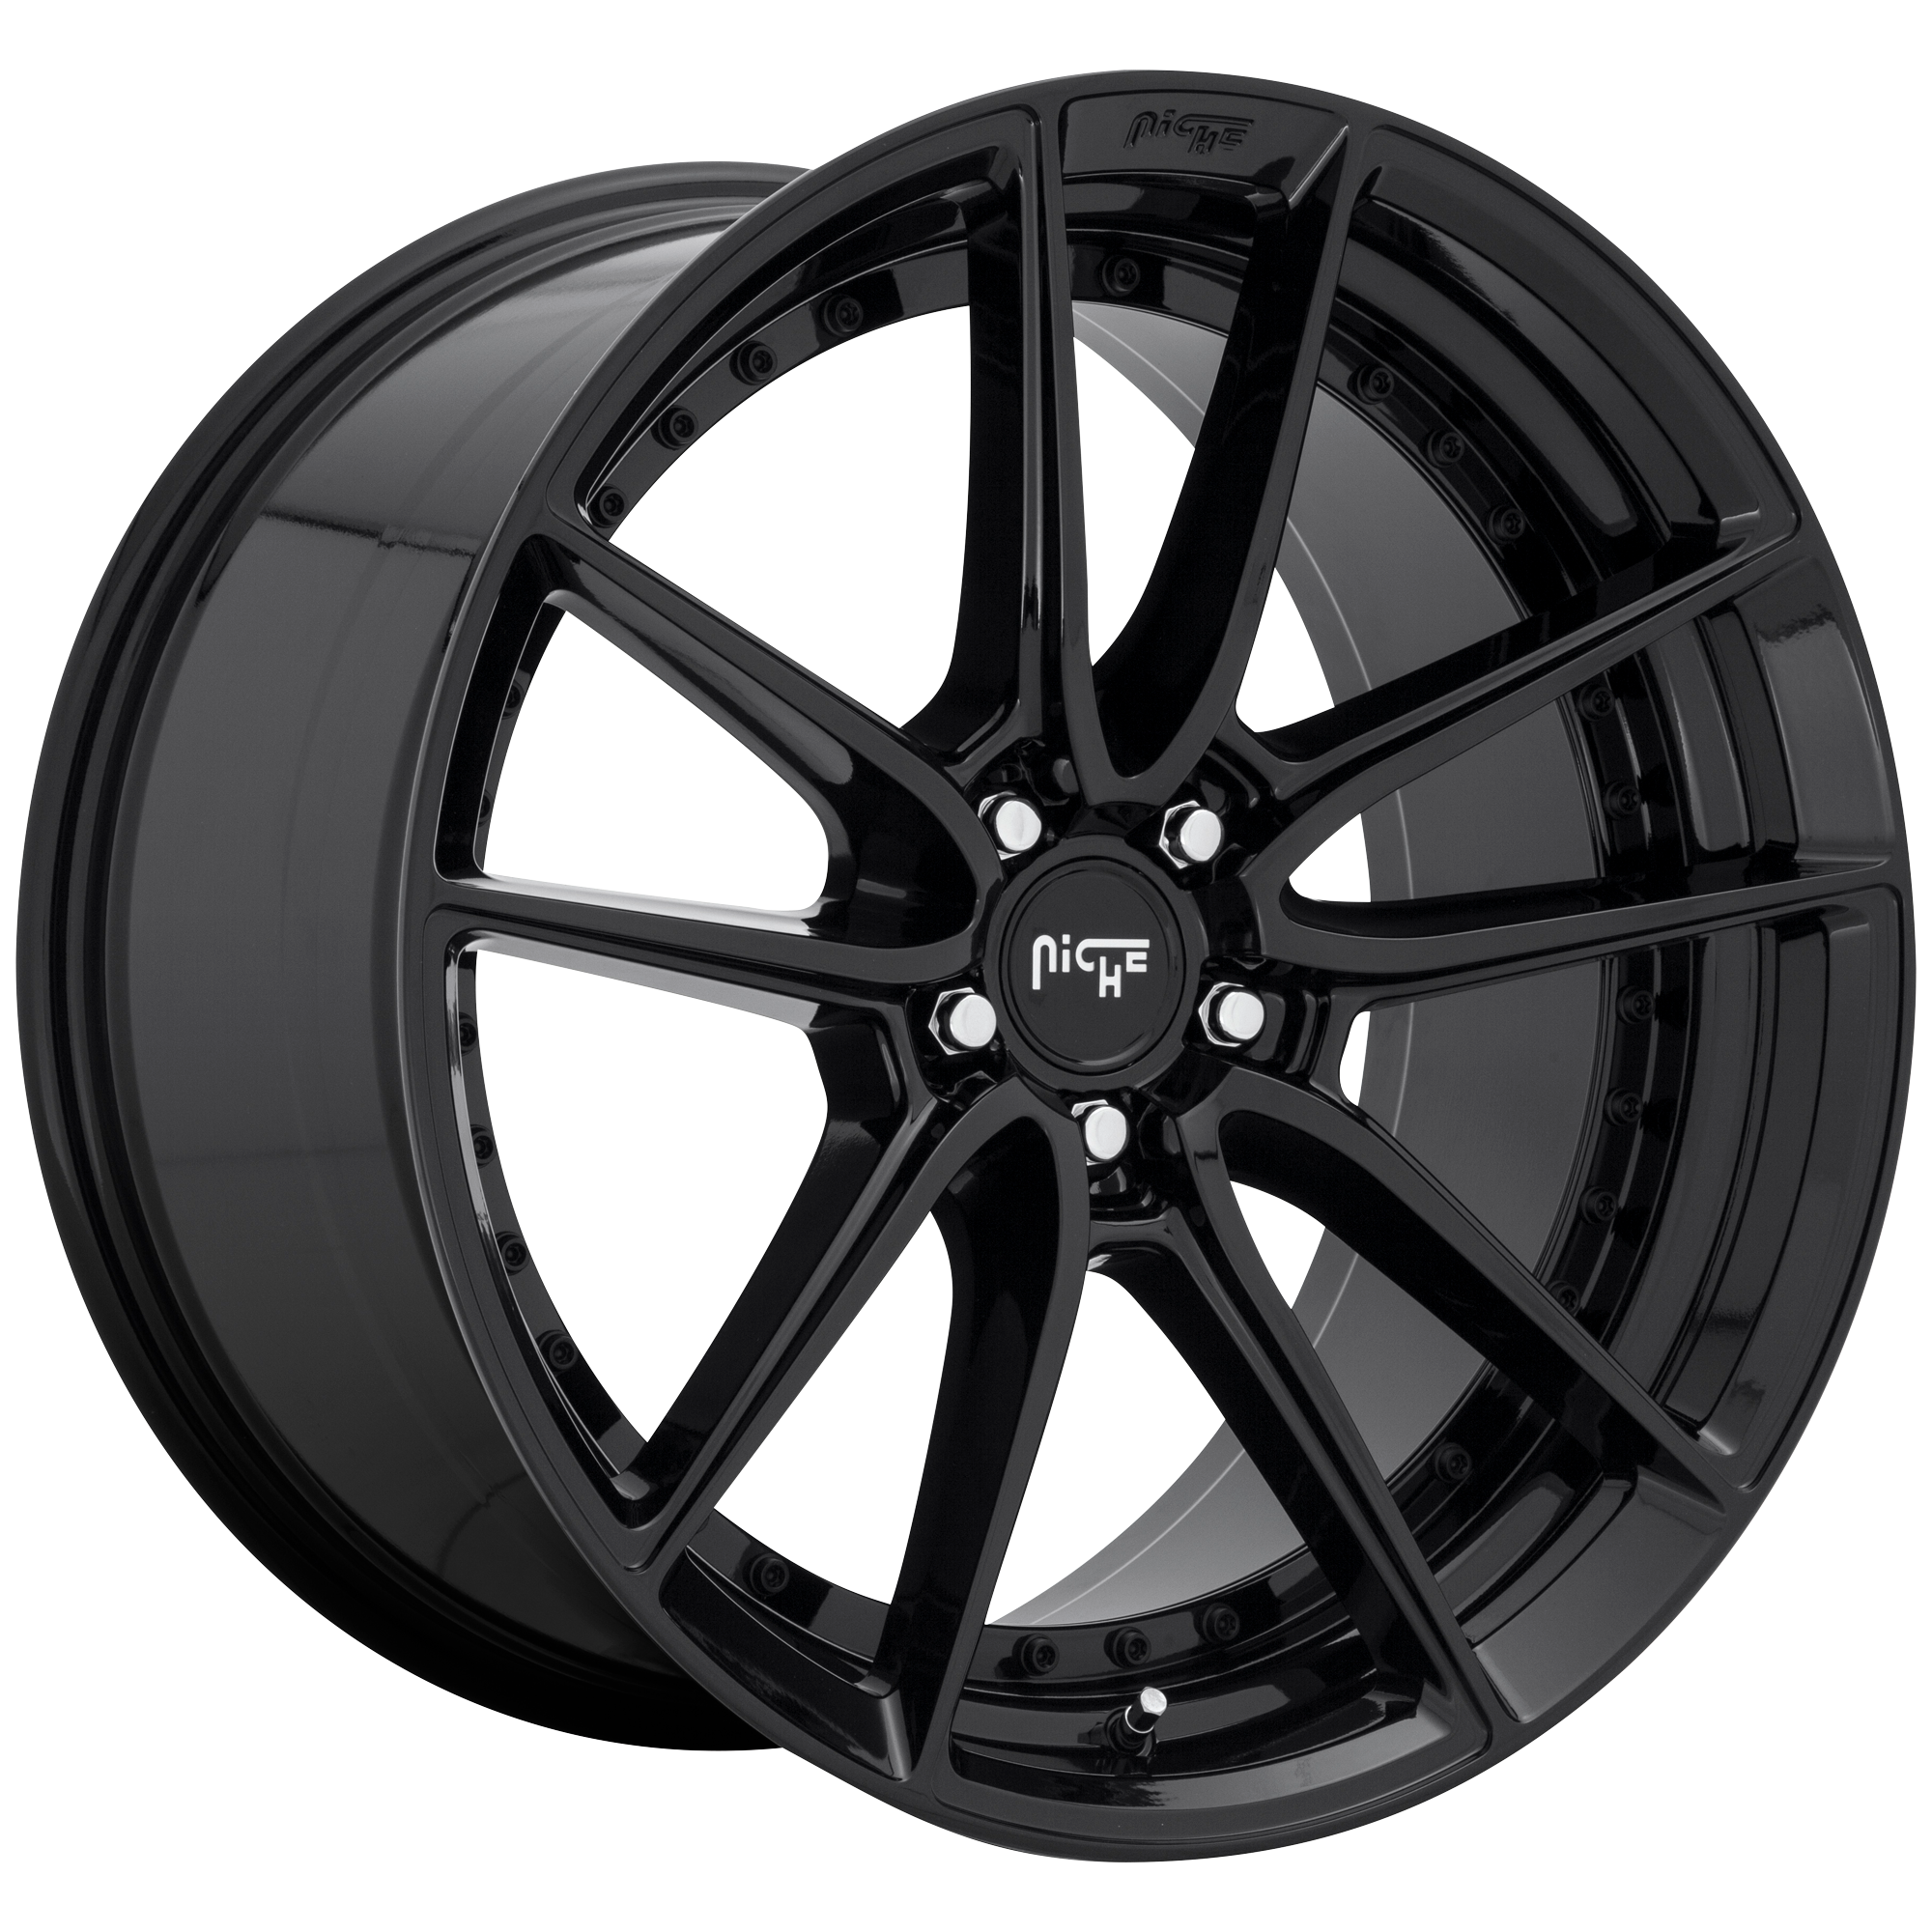 DFS 19x9.5 5x112.00 GLOSS BLACK (48 mm) - Tires and Engine Performance